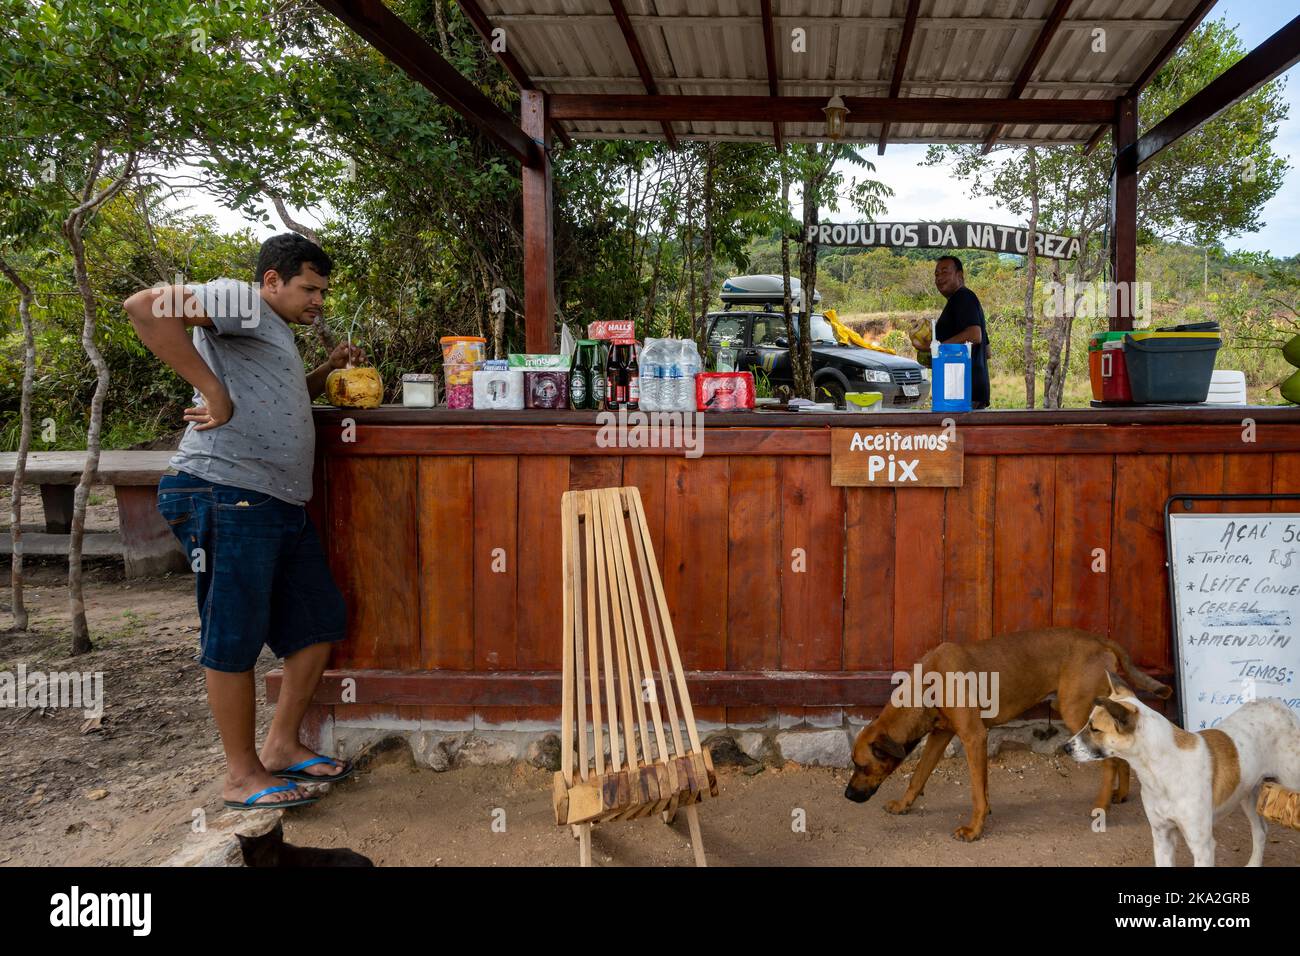 A man selling snacks and cold drinks at a roadside stand. Tepequém, Roraima State, Brazil. Stock Photo